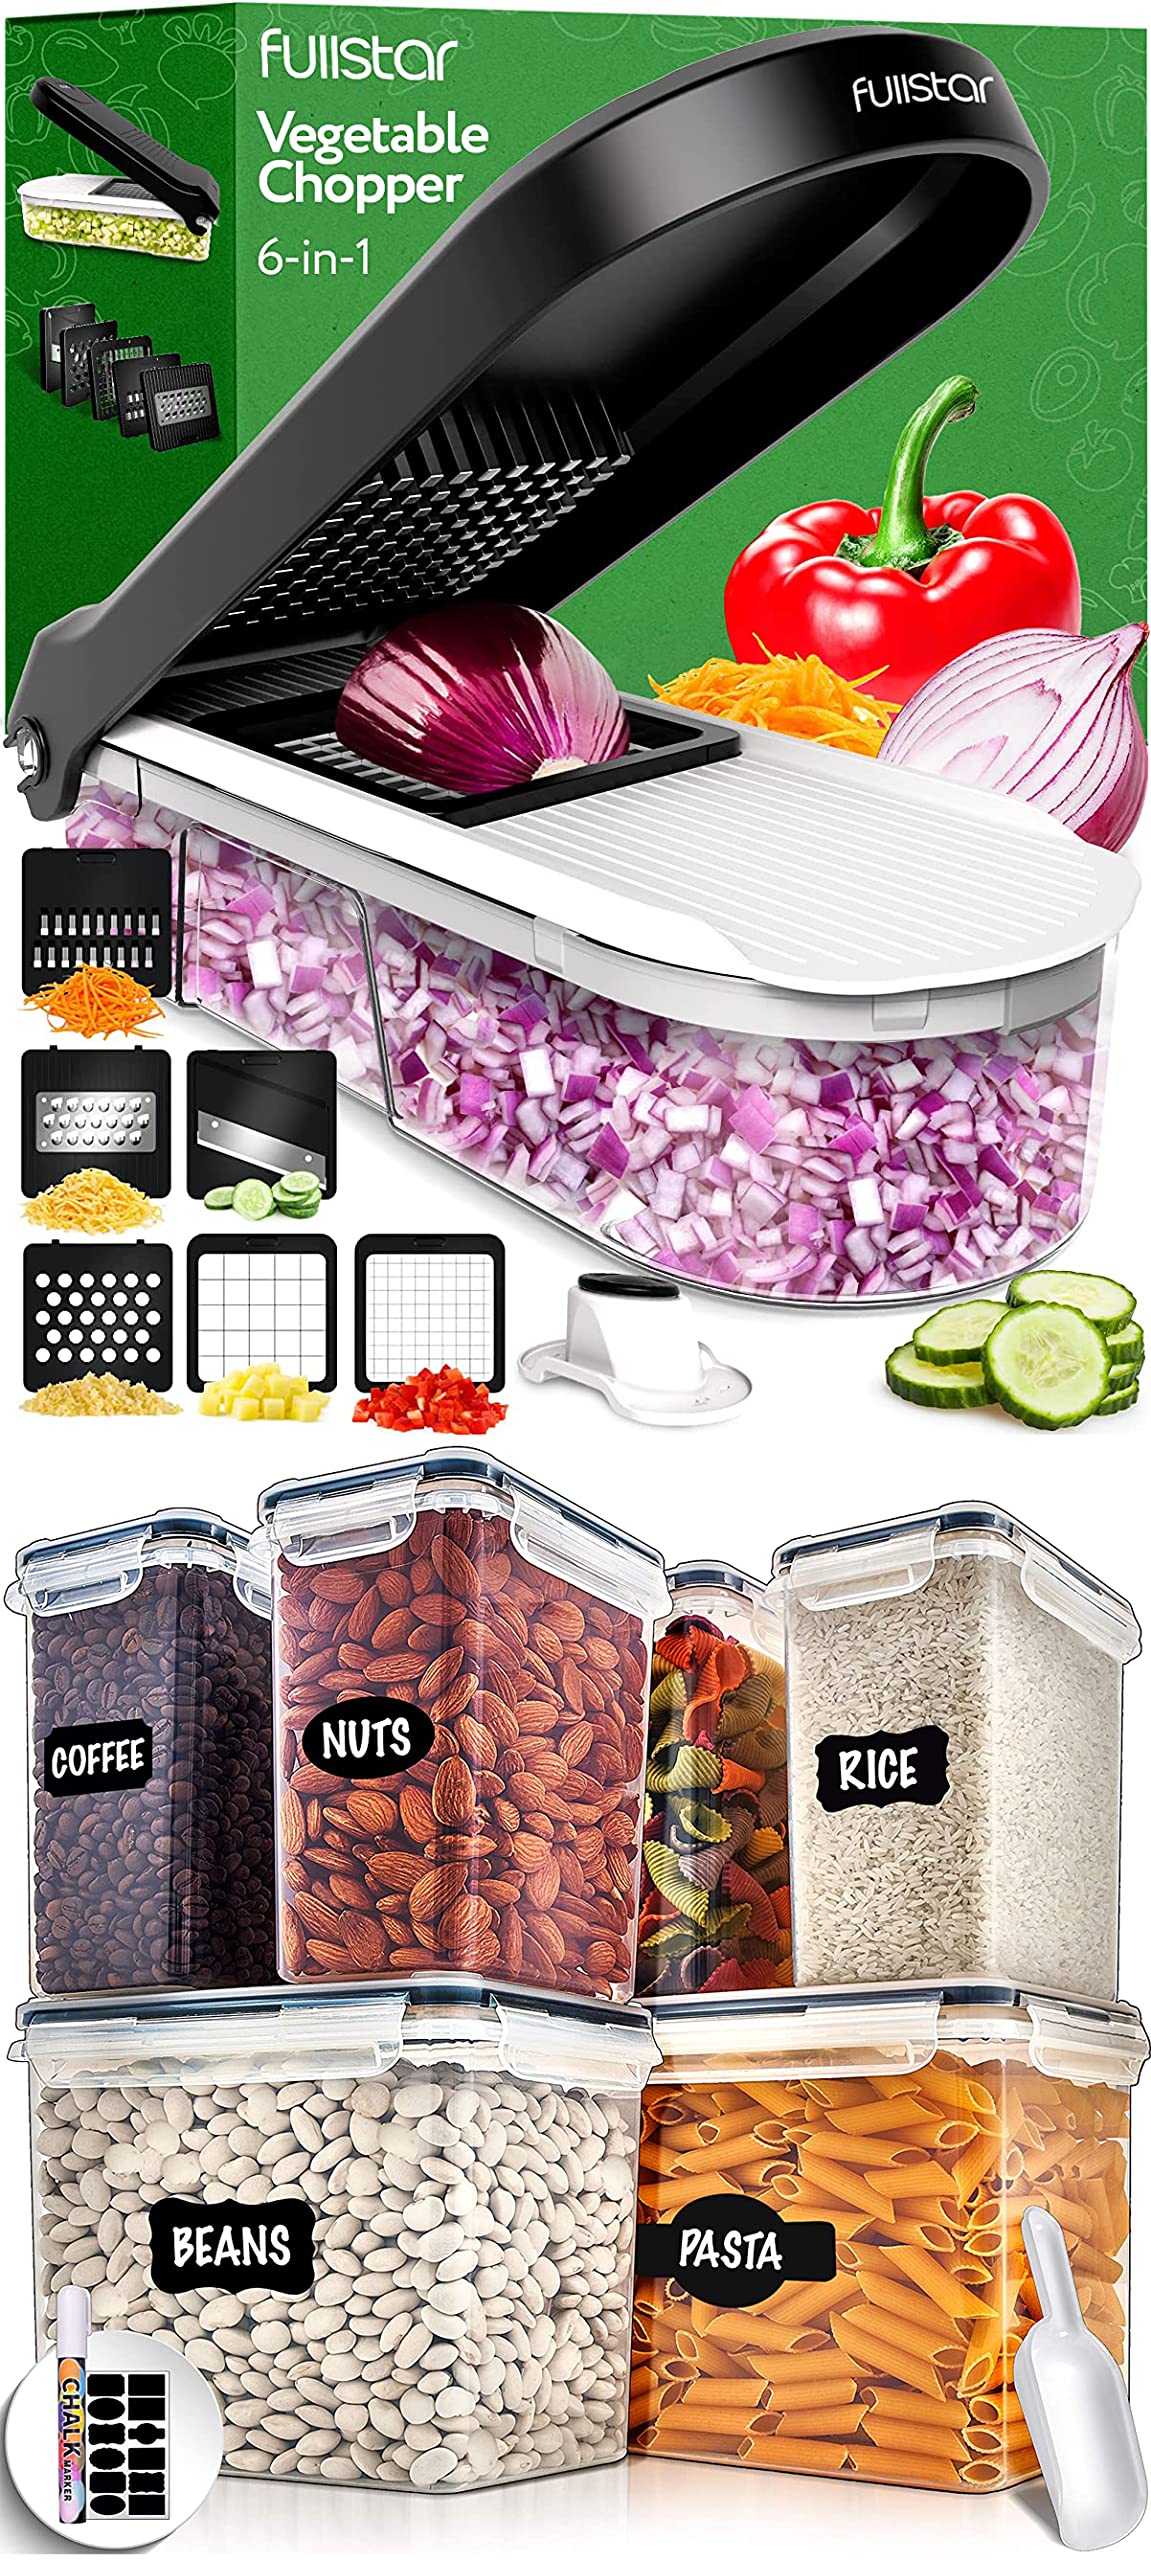 Fullstar Compact Vegetable Chopper and Storage Bins with Lids, Airtight food storage containers for Kitchen & Pantry organization. Includes Marker, Pen & Scoop (6 Pack)